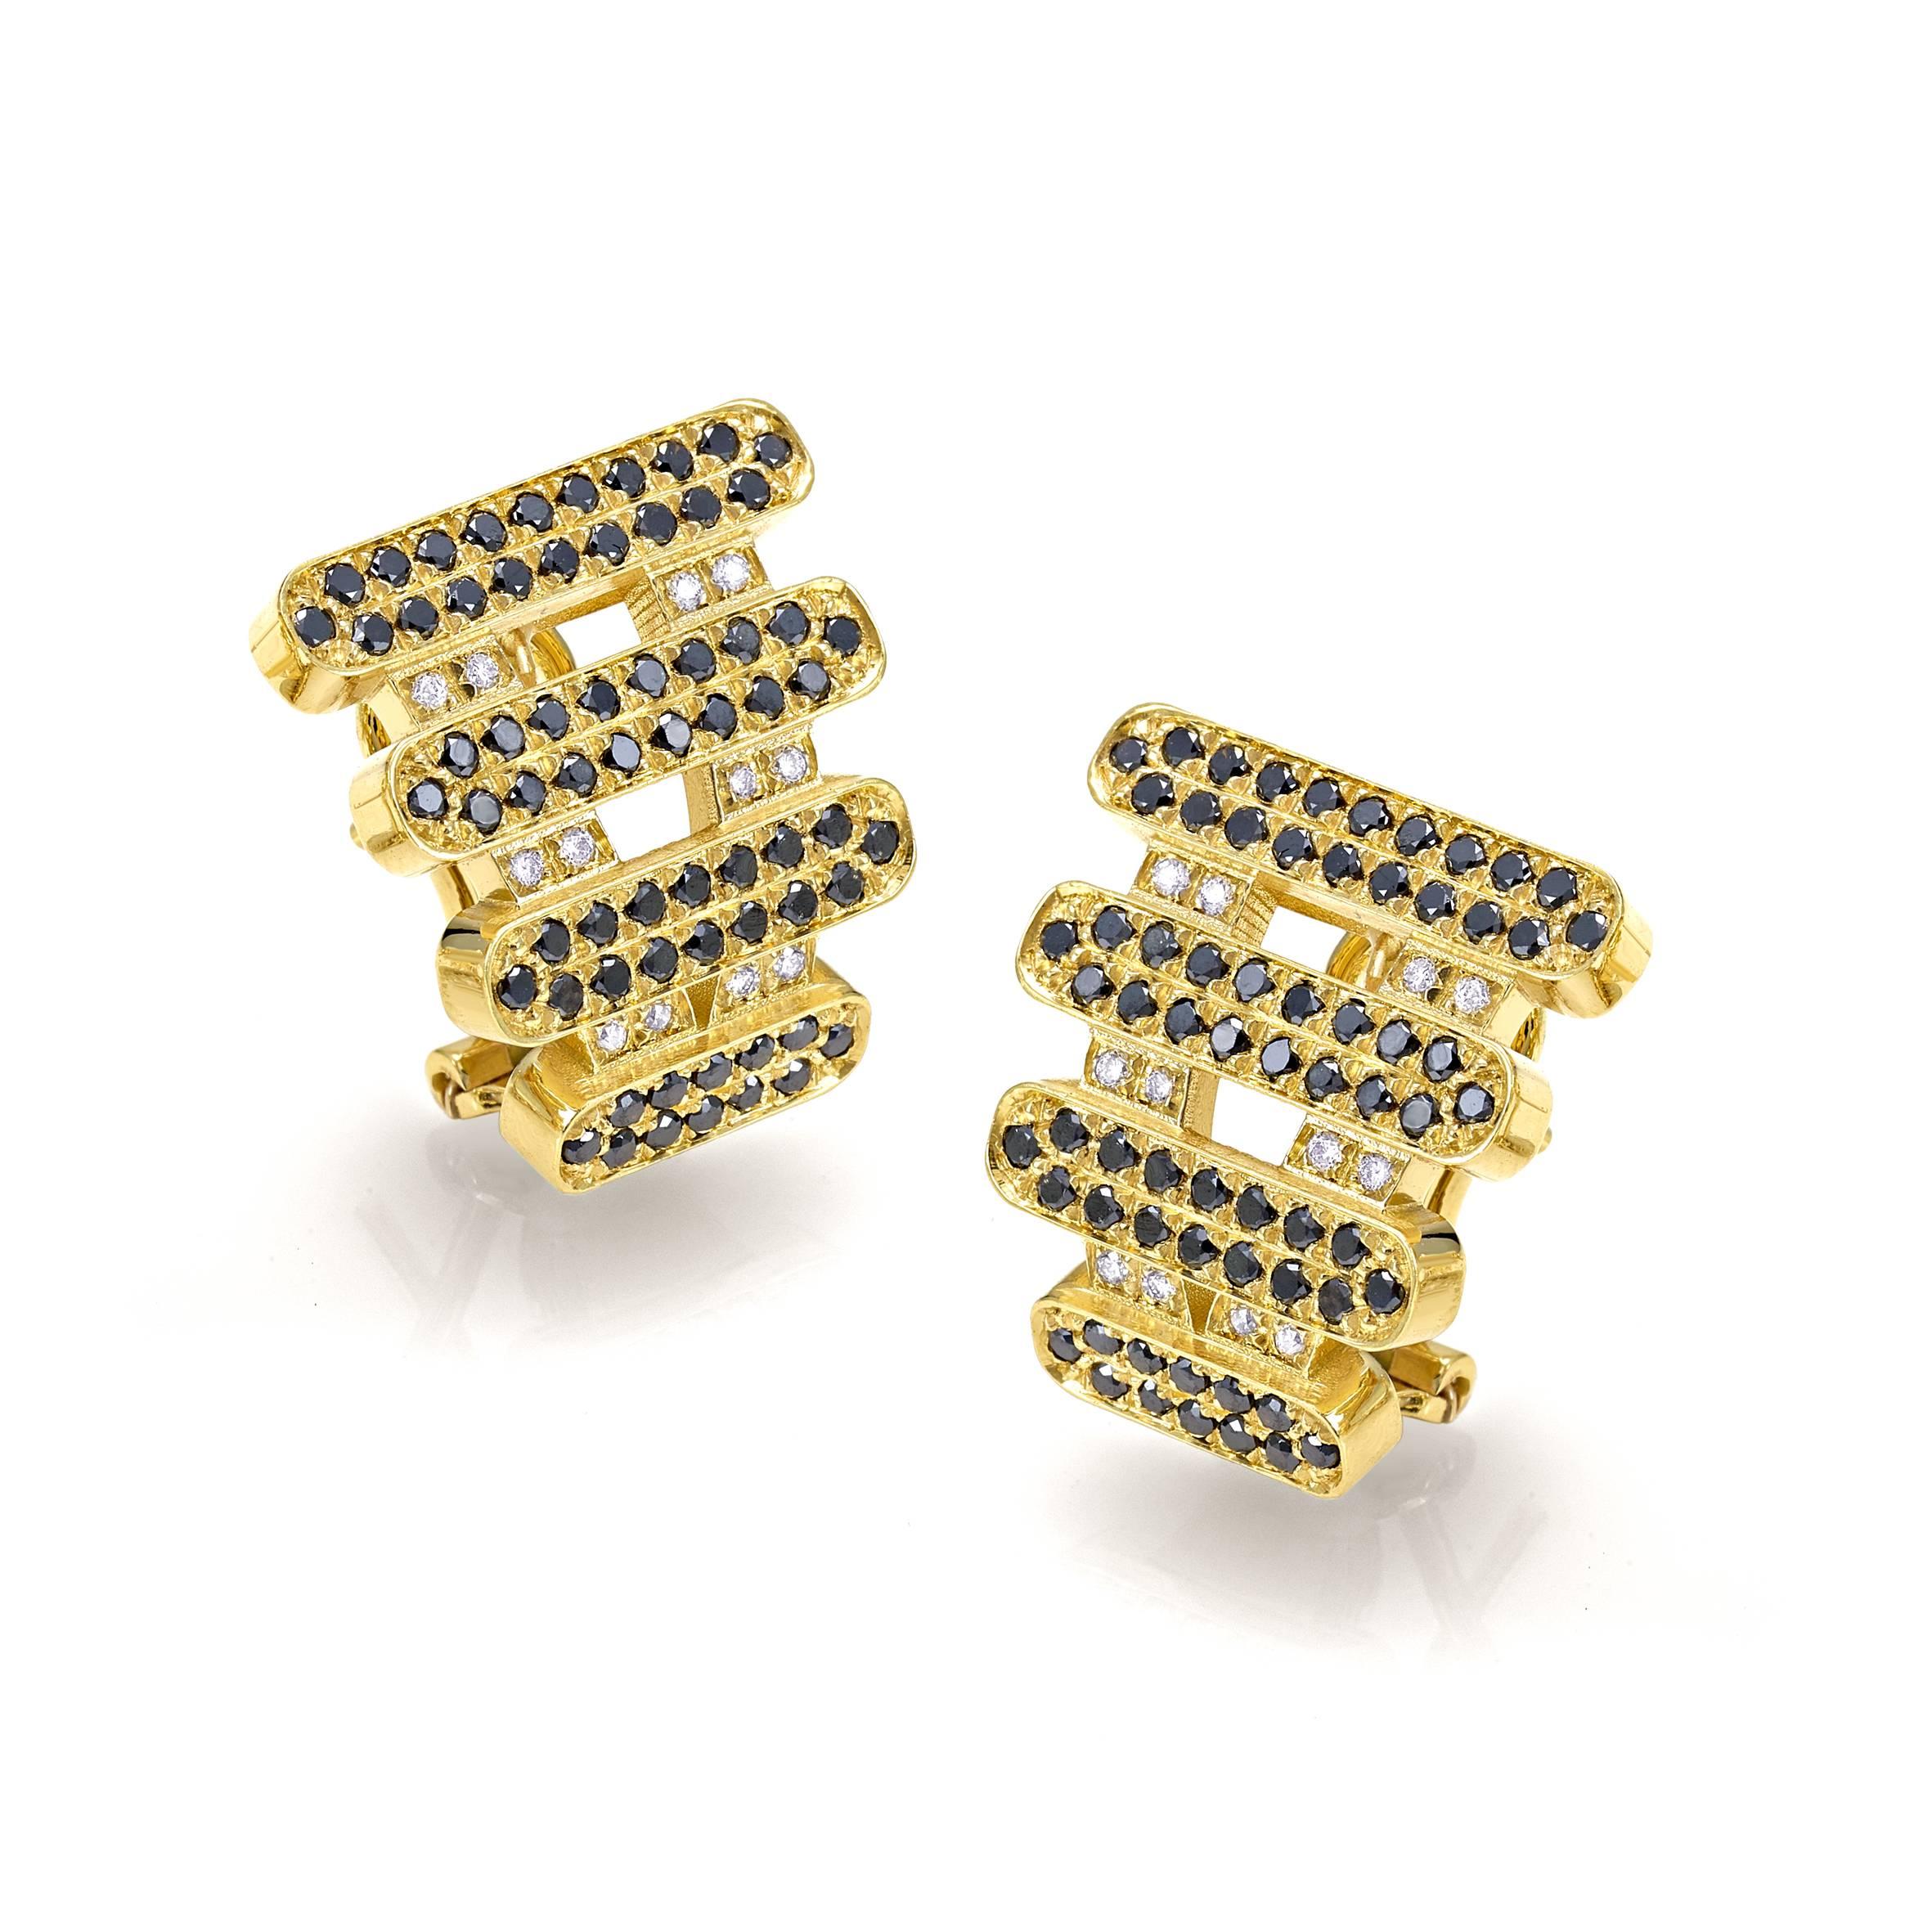 Moonlight earrings in 18 kt  yellow gold white and black diamonds 
These pieces are just unique in our production story

the total weight of the gold is  gr 16.40
the total weight of the white diamonds is ct 0.18 - color GH clarity VVS1
the total